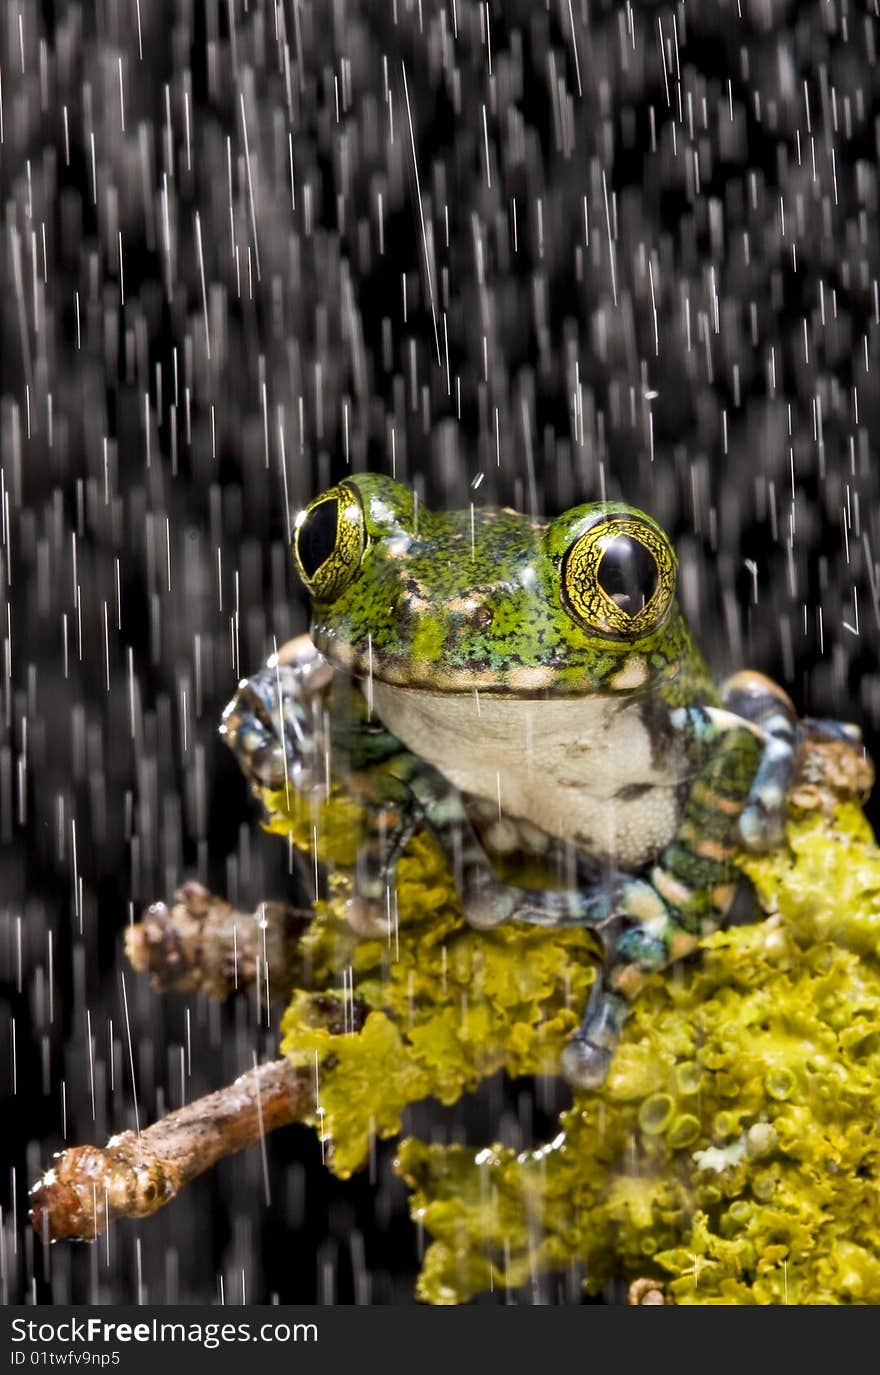 Close up of a Peacock Tree Frog on a green mossy branch against a black background with a shower of rain